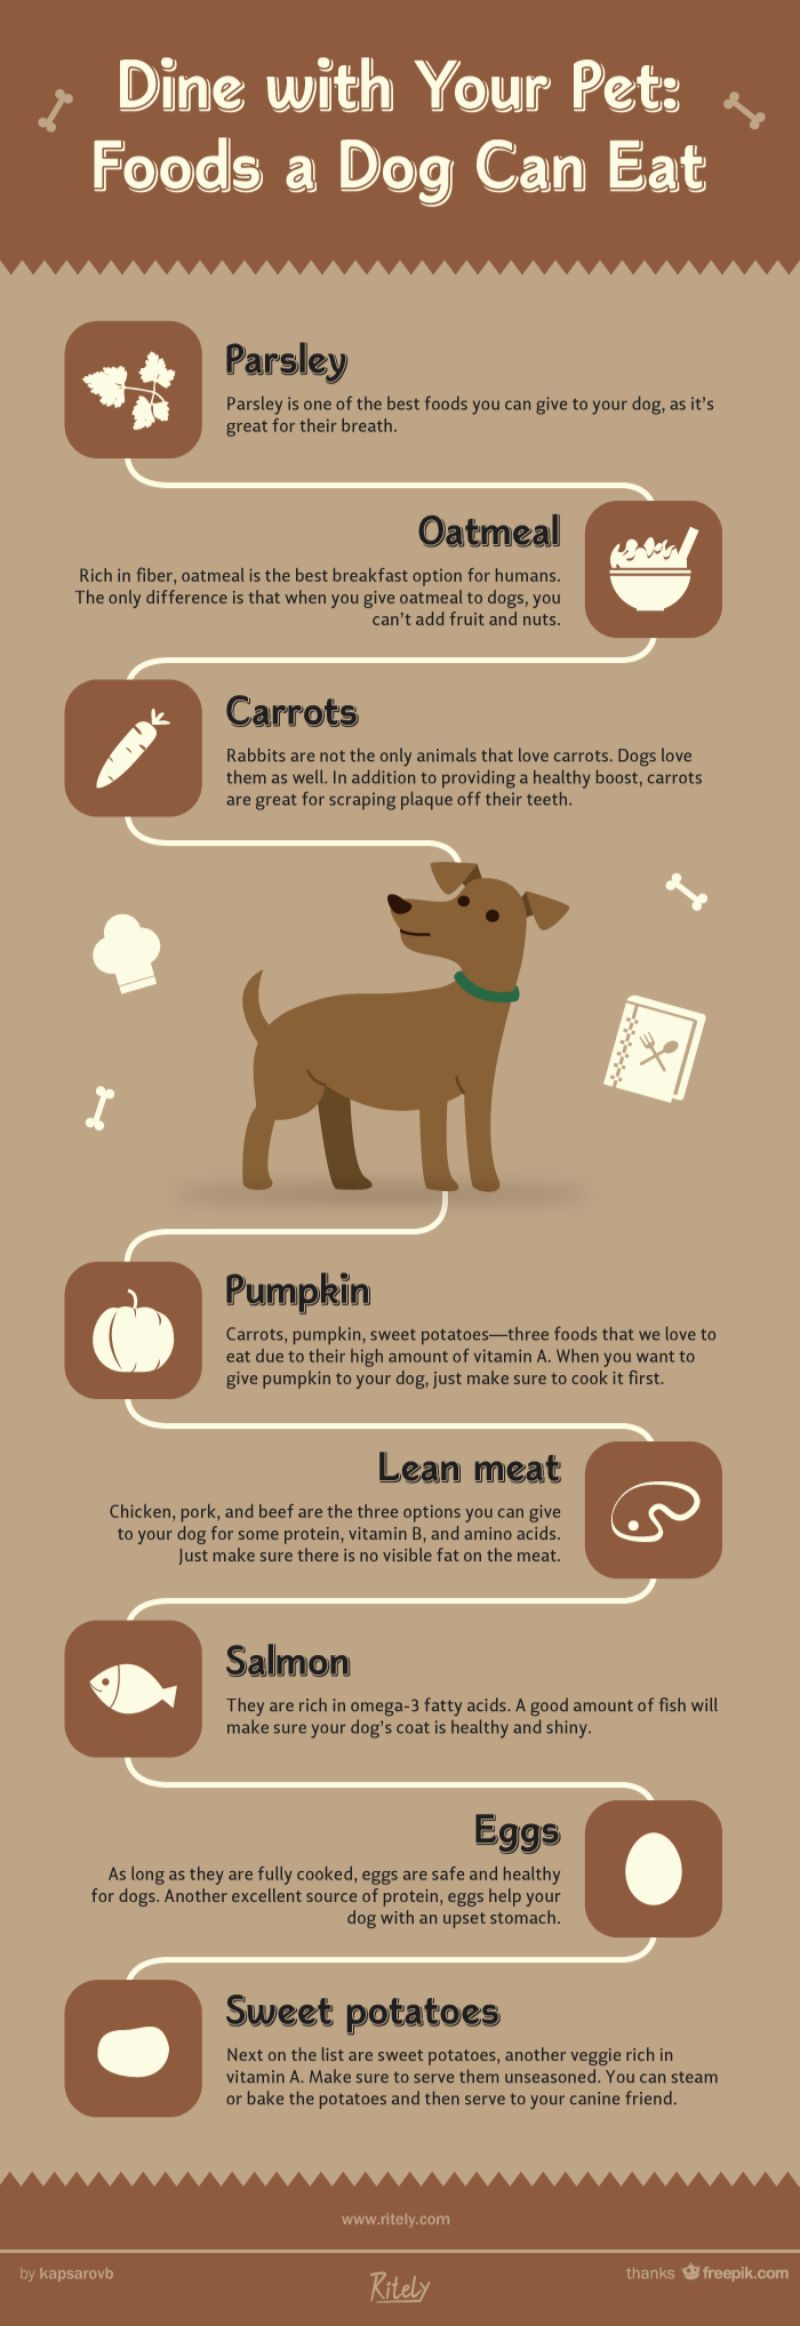 Dine with Your Pet: Foods a Dog Can Eat